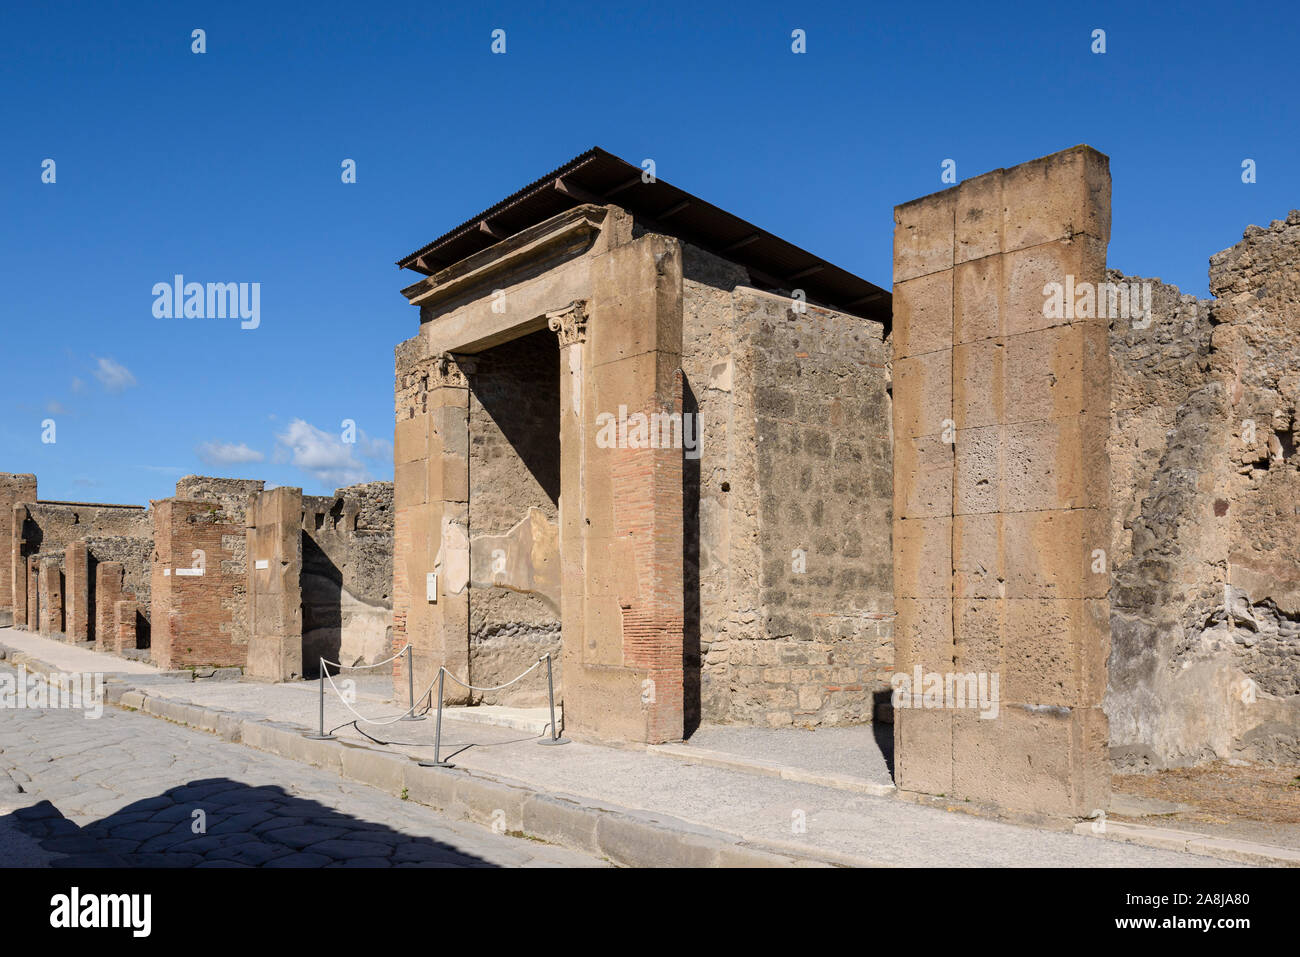 Pompei. Italy. Archaeological site of Pompeii. Casa del Fauno / House of the Faun, main entrance, with two Corinthian antae supporting a moulded archi Stock Photo